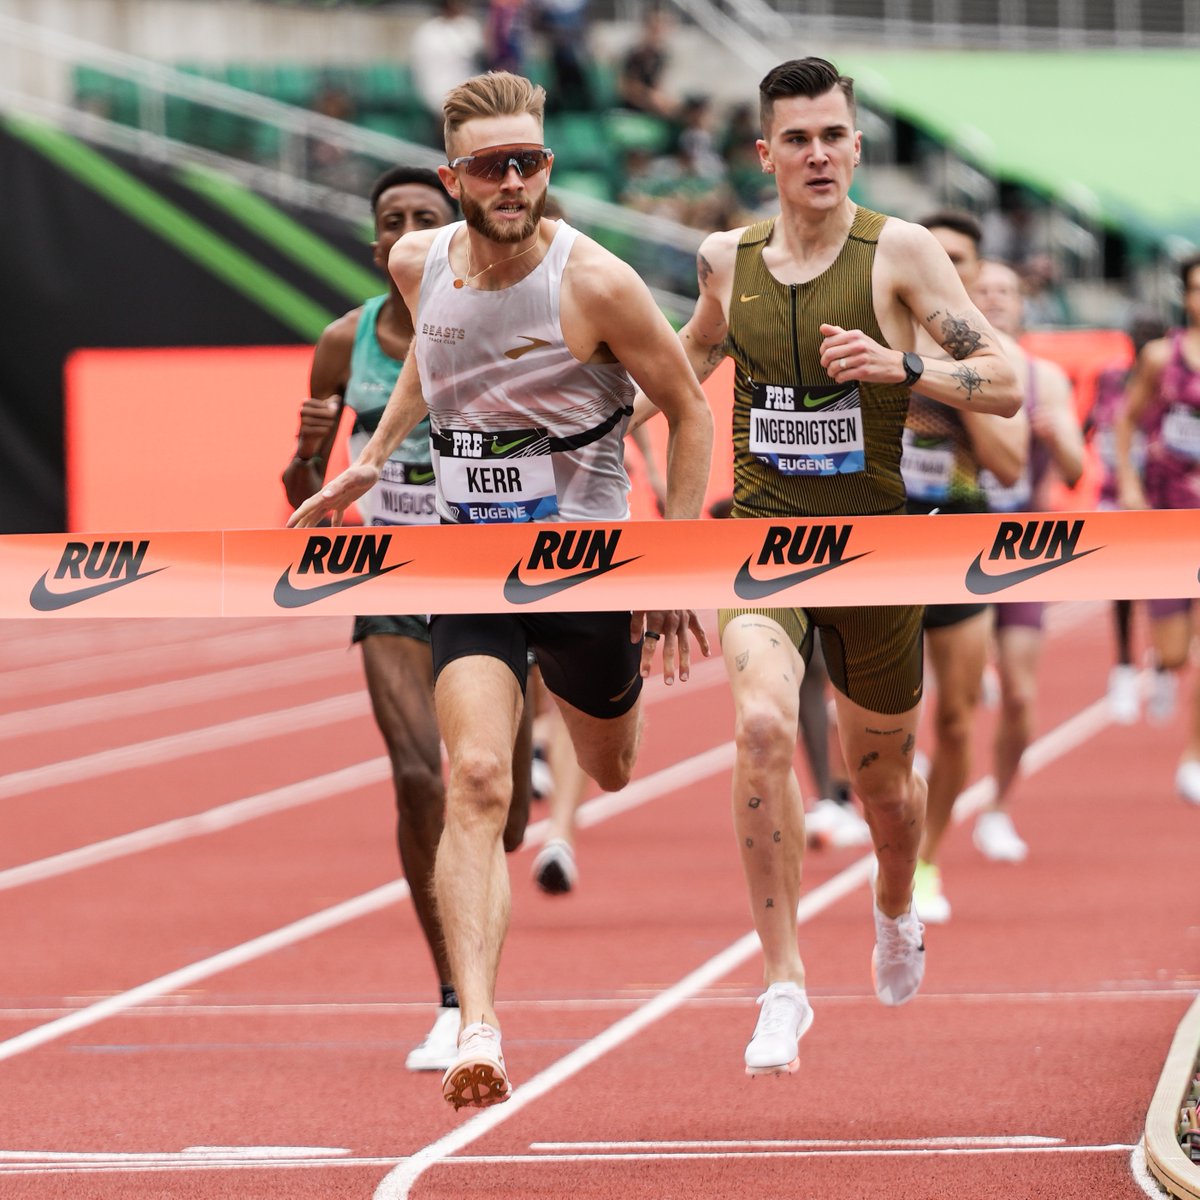 KERR 😤 🇬🇧's @joshk97 powers to the win in the highly-anticipated Bowerman Mile. 3:45.34 national record to hold off Olympic 1500m champ Jakob Ingebrigtsen. 📸 @matthewquine #DiamondLeague